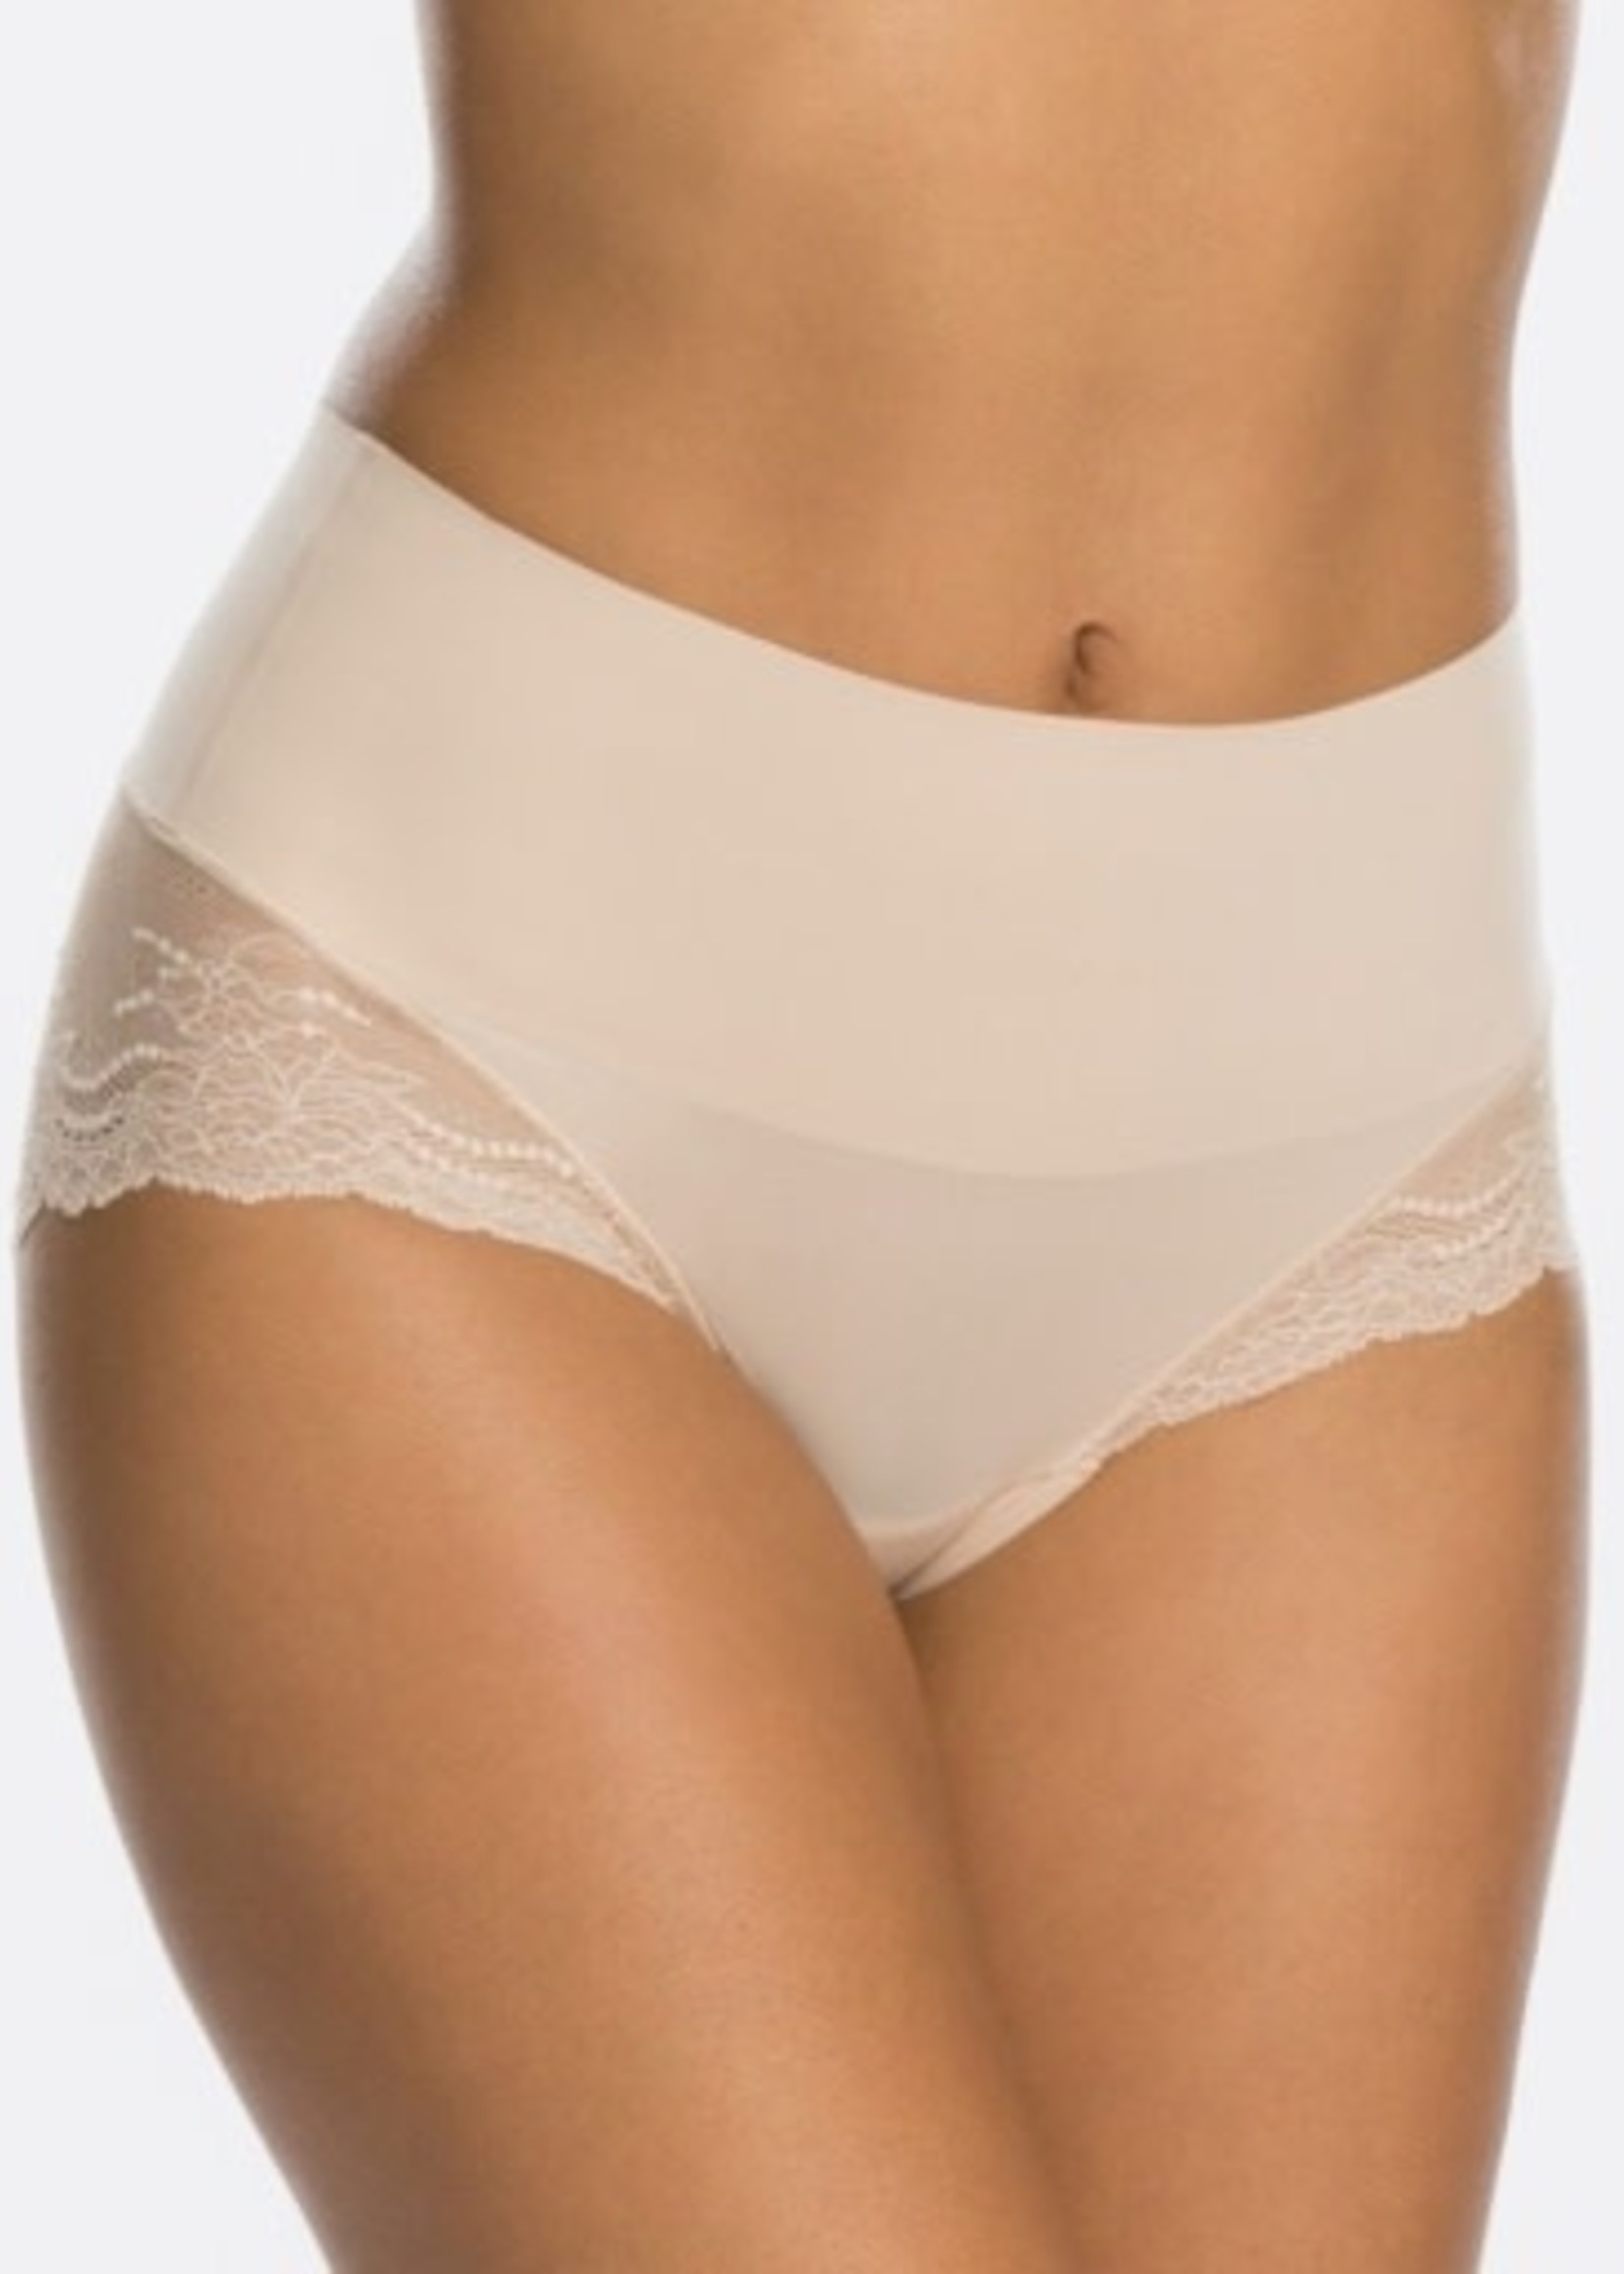 Spanx Spanx Lace Hi-Hipster